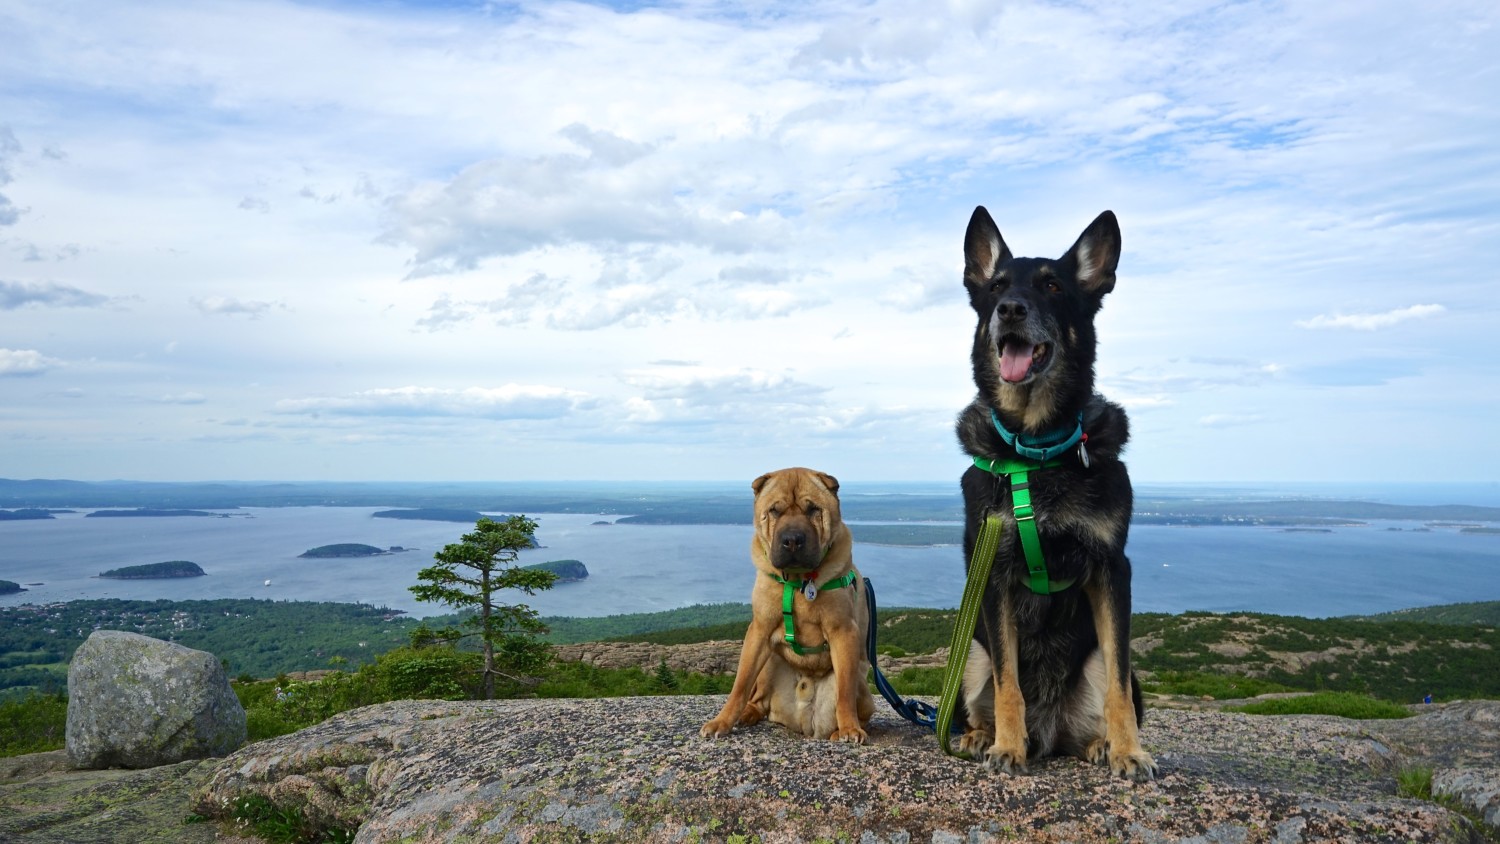 Ty the Shar-pei and Buster the German Shepherd from GoPetFriendly.com on Cadillac Mountain in pet-friendly Acadia National Park, Maine